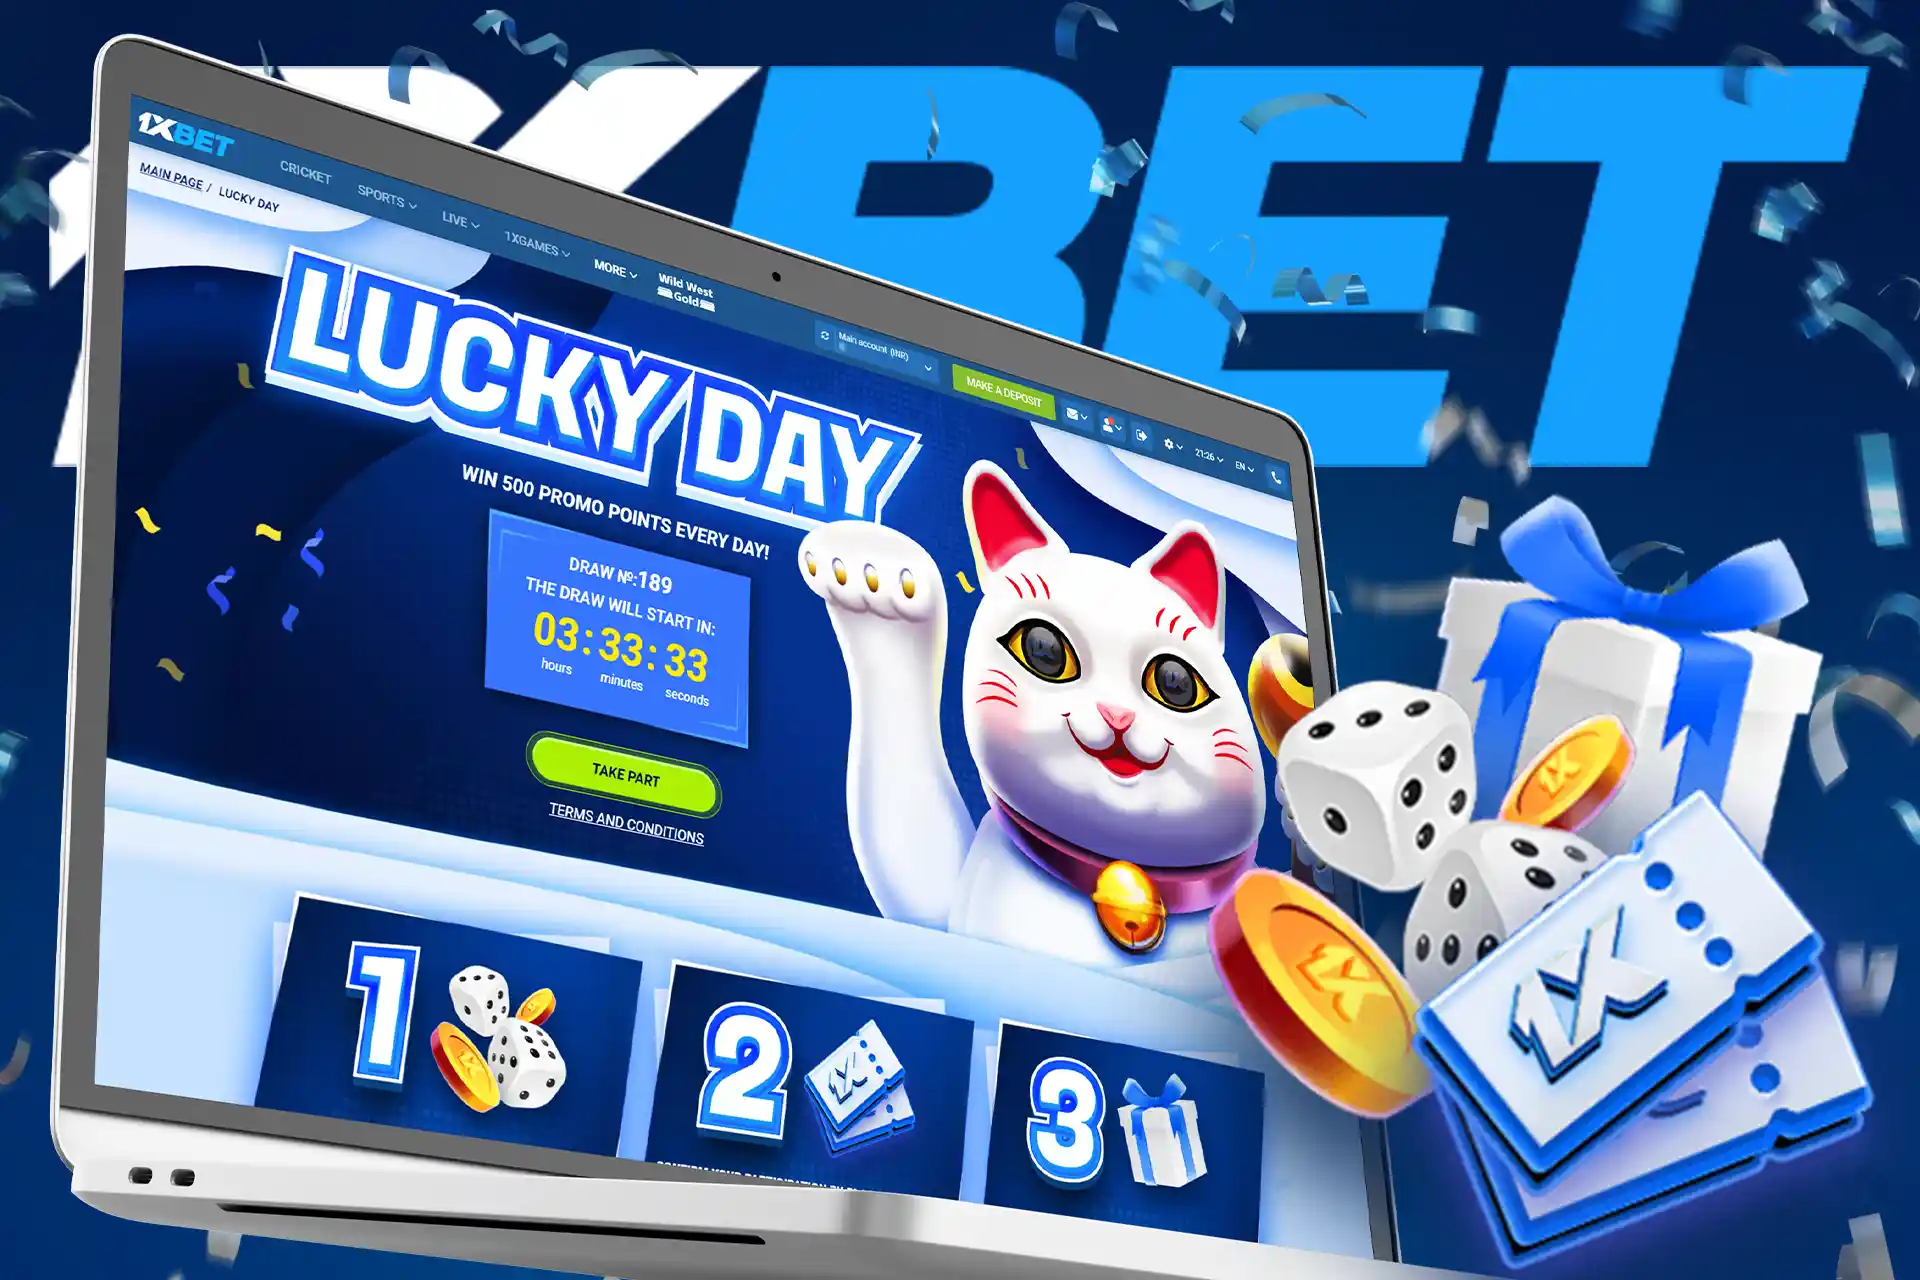 Participate in the lucky number drawing and get up to 500 points from 1xBet.